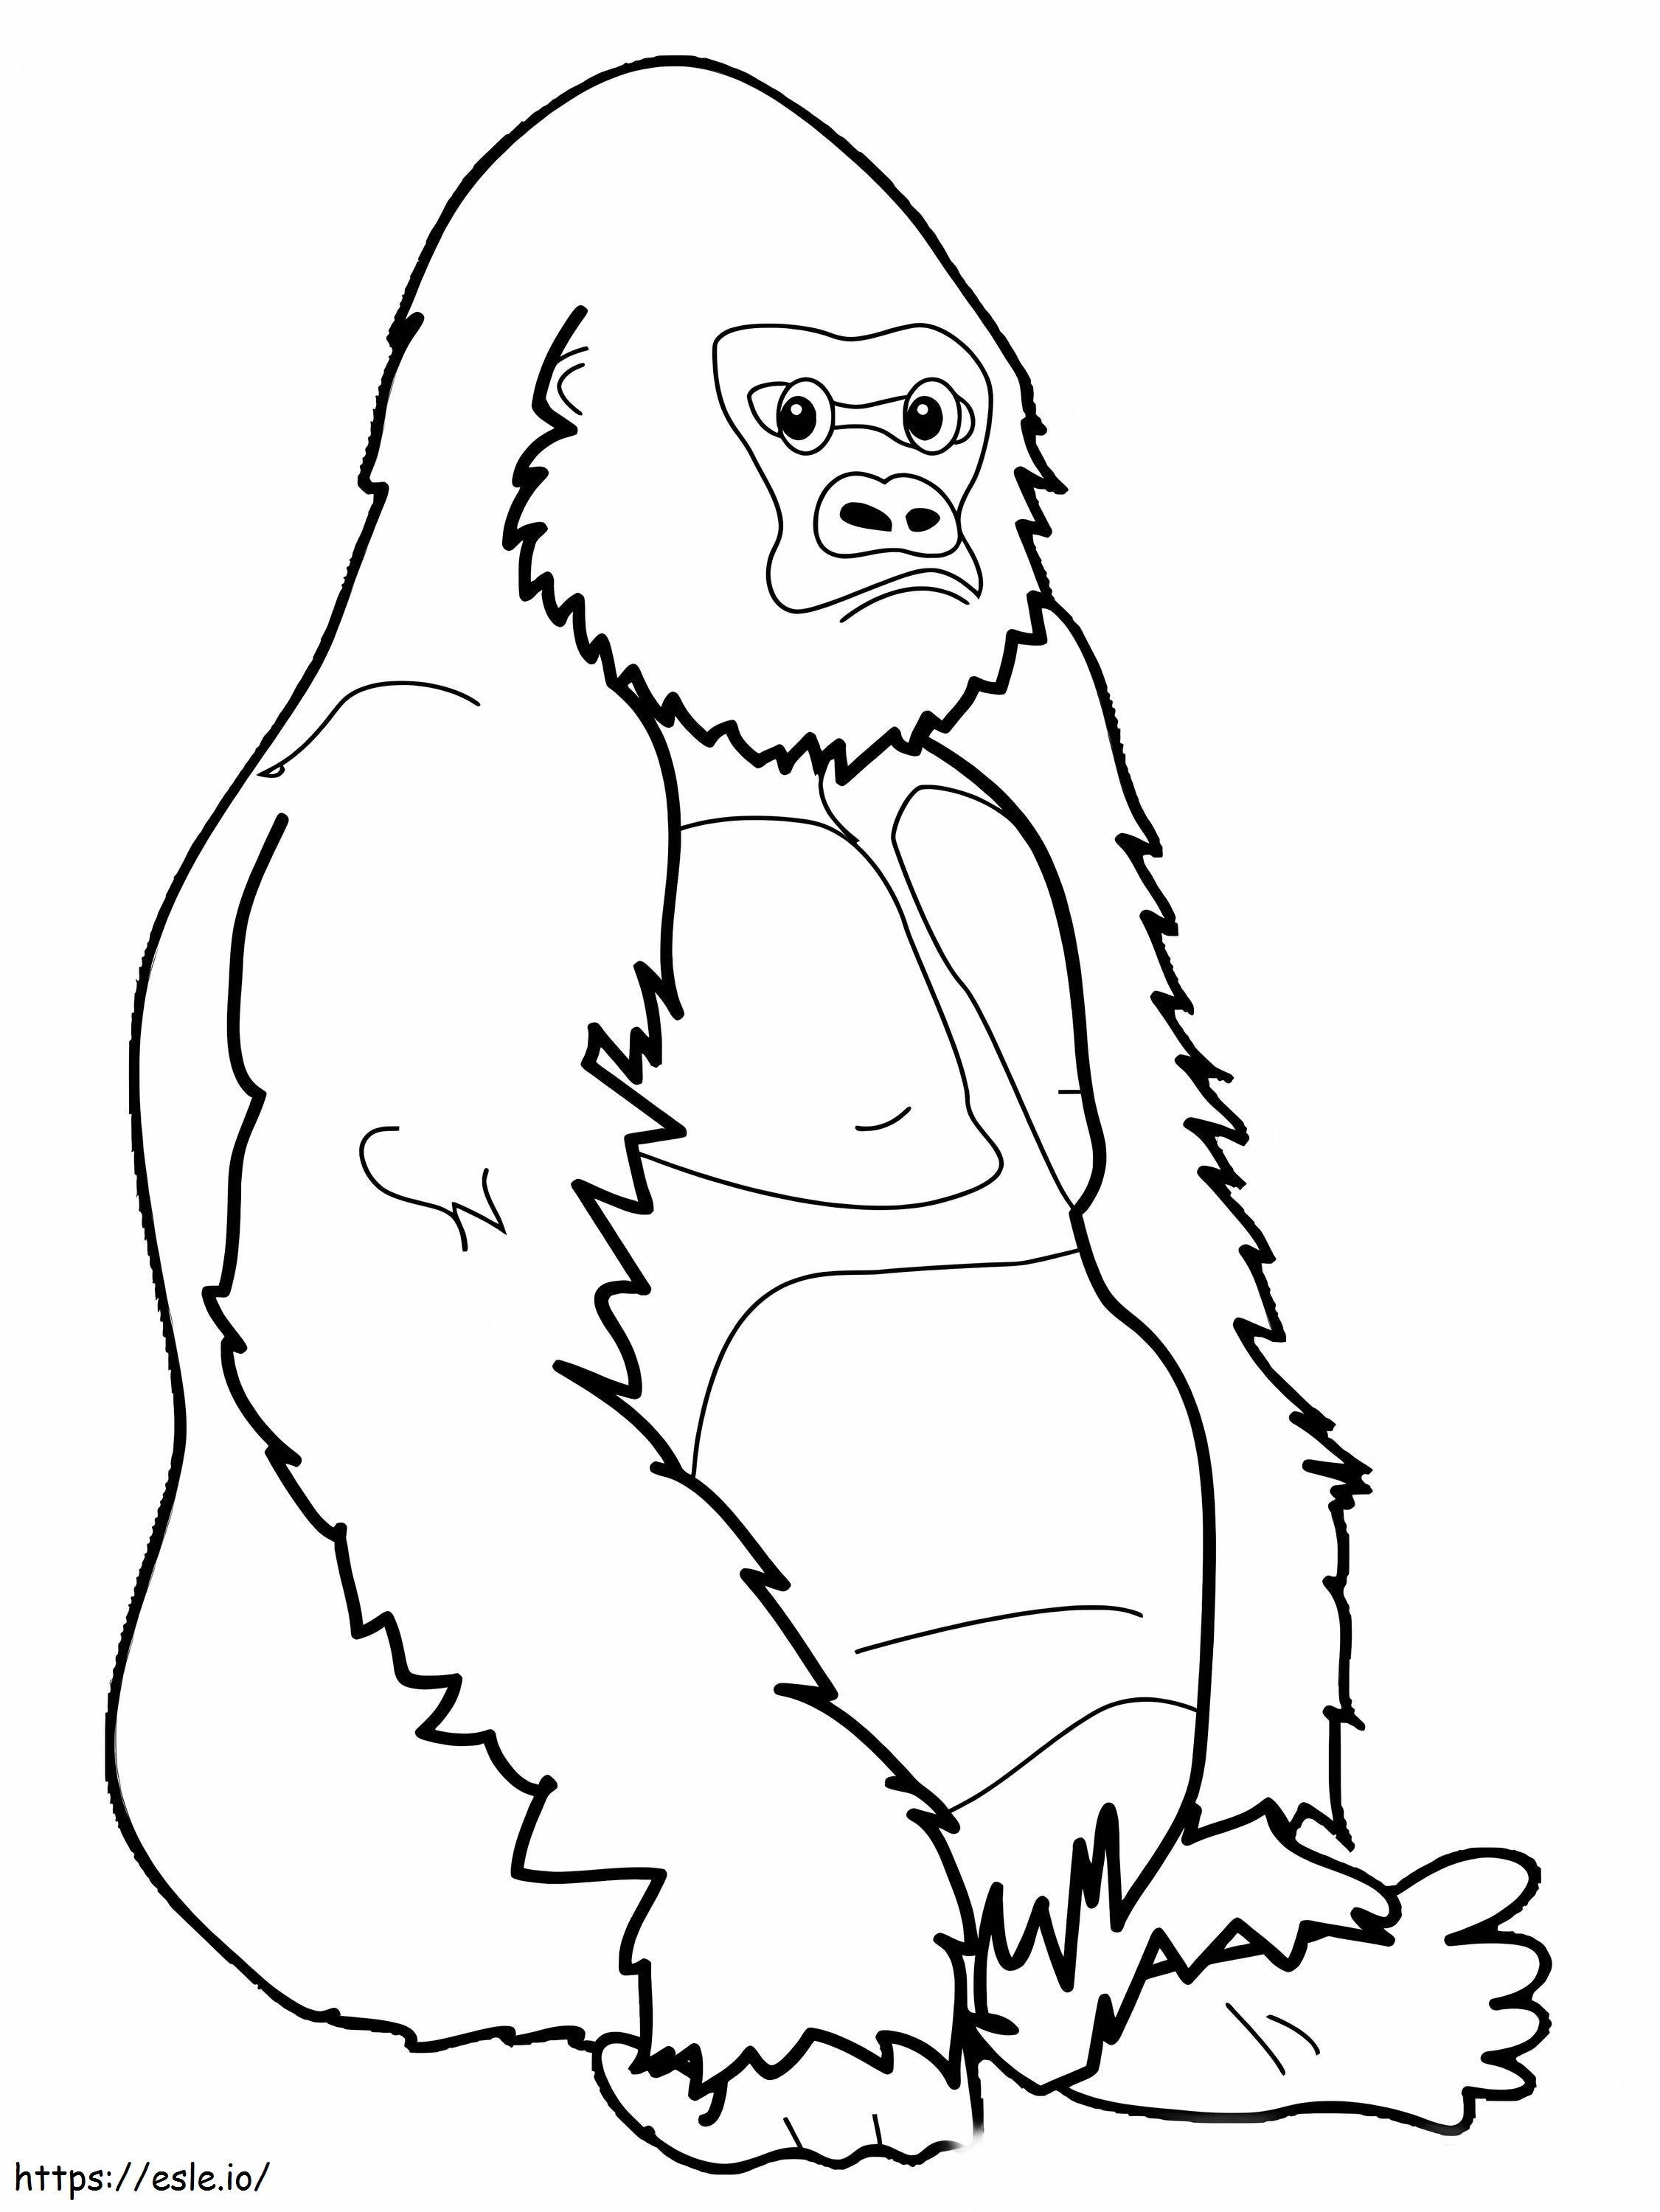 Sitting Apes coloring page